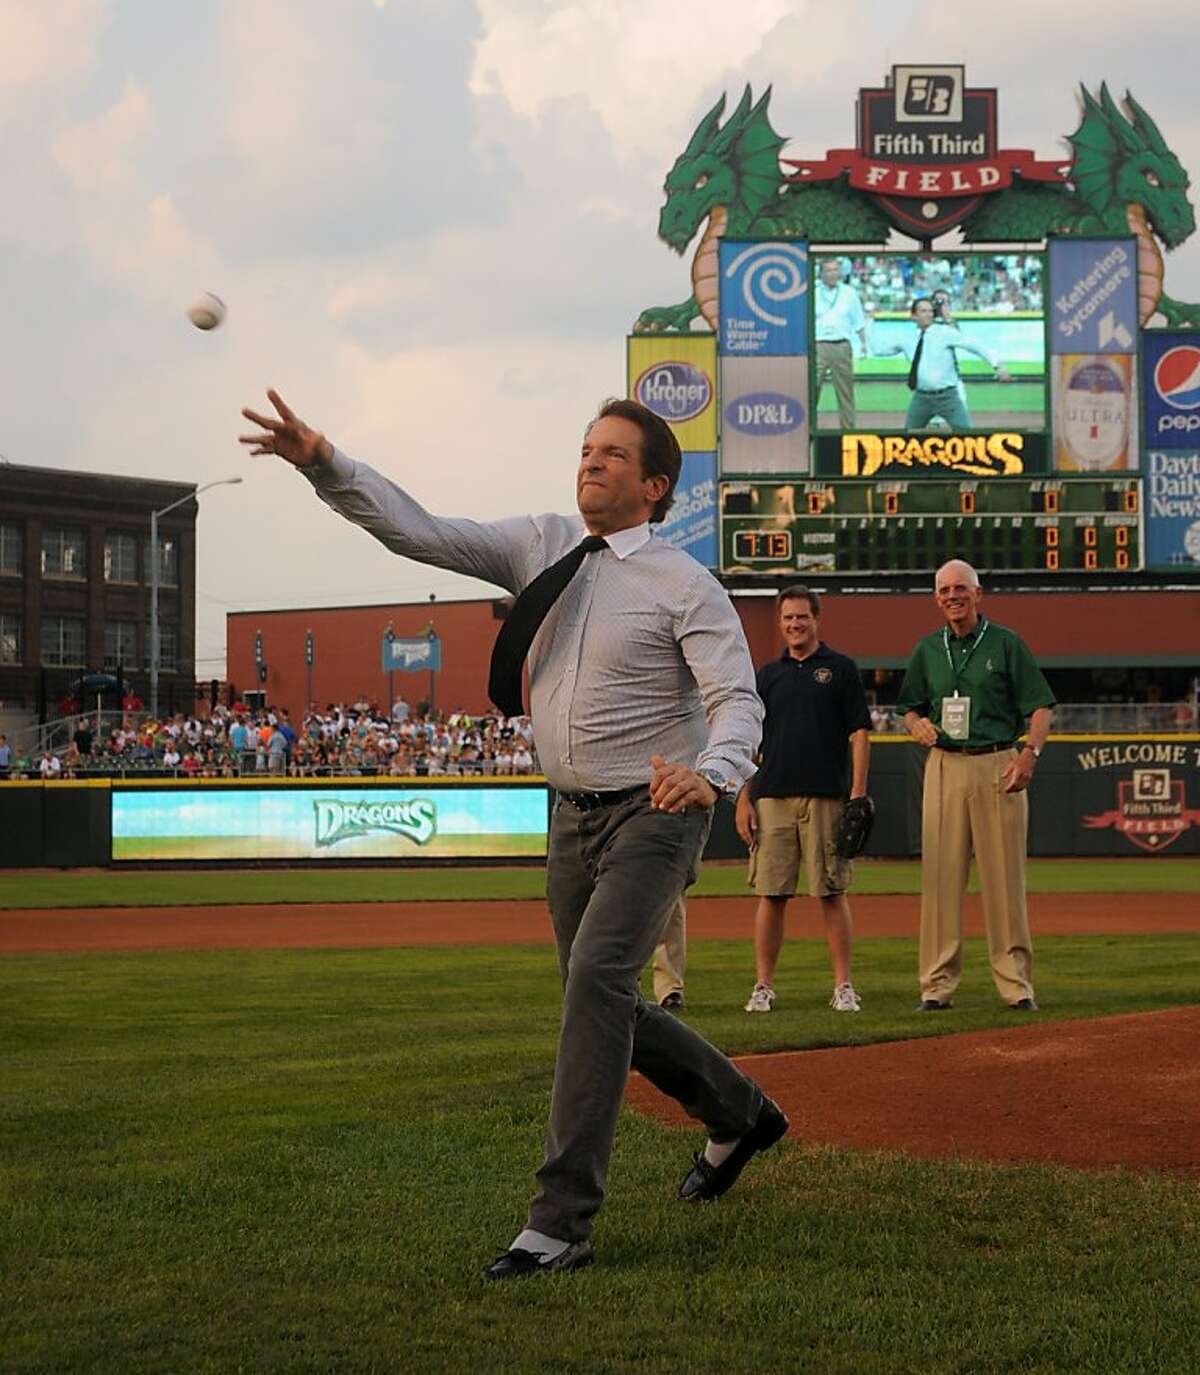 Peter Guber throws out the first pitch in a game for the Dayton Dragons, a Class A minor-league baseball team in the Cincinnati Reds' farm system. Guber is a co-owner of Dragons, as well as the the Golden State Warriors in the NBA. This pitch came before the team's 815th consecutive home sellout, on July 9, 2011, at Fifth Third Field in Dayton, Ohio.